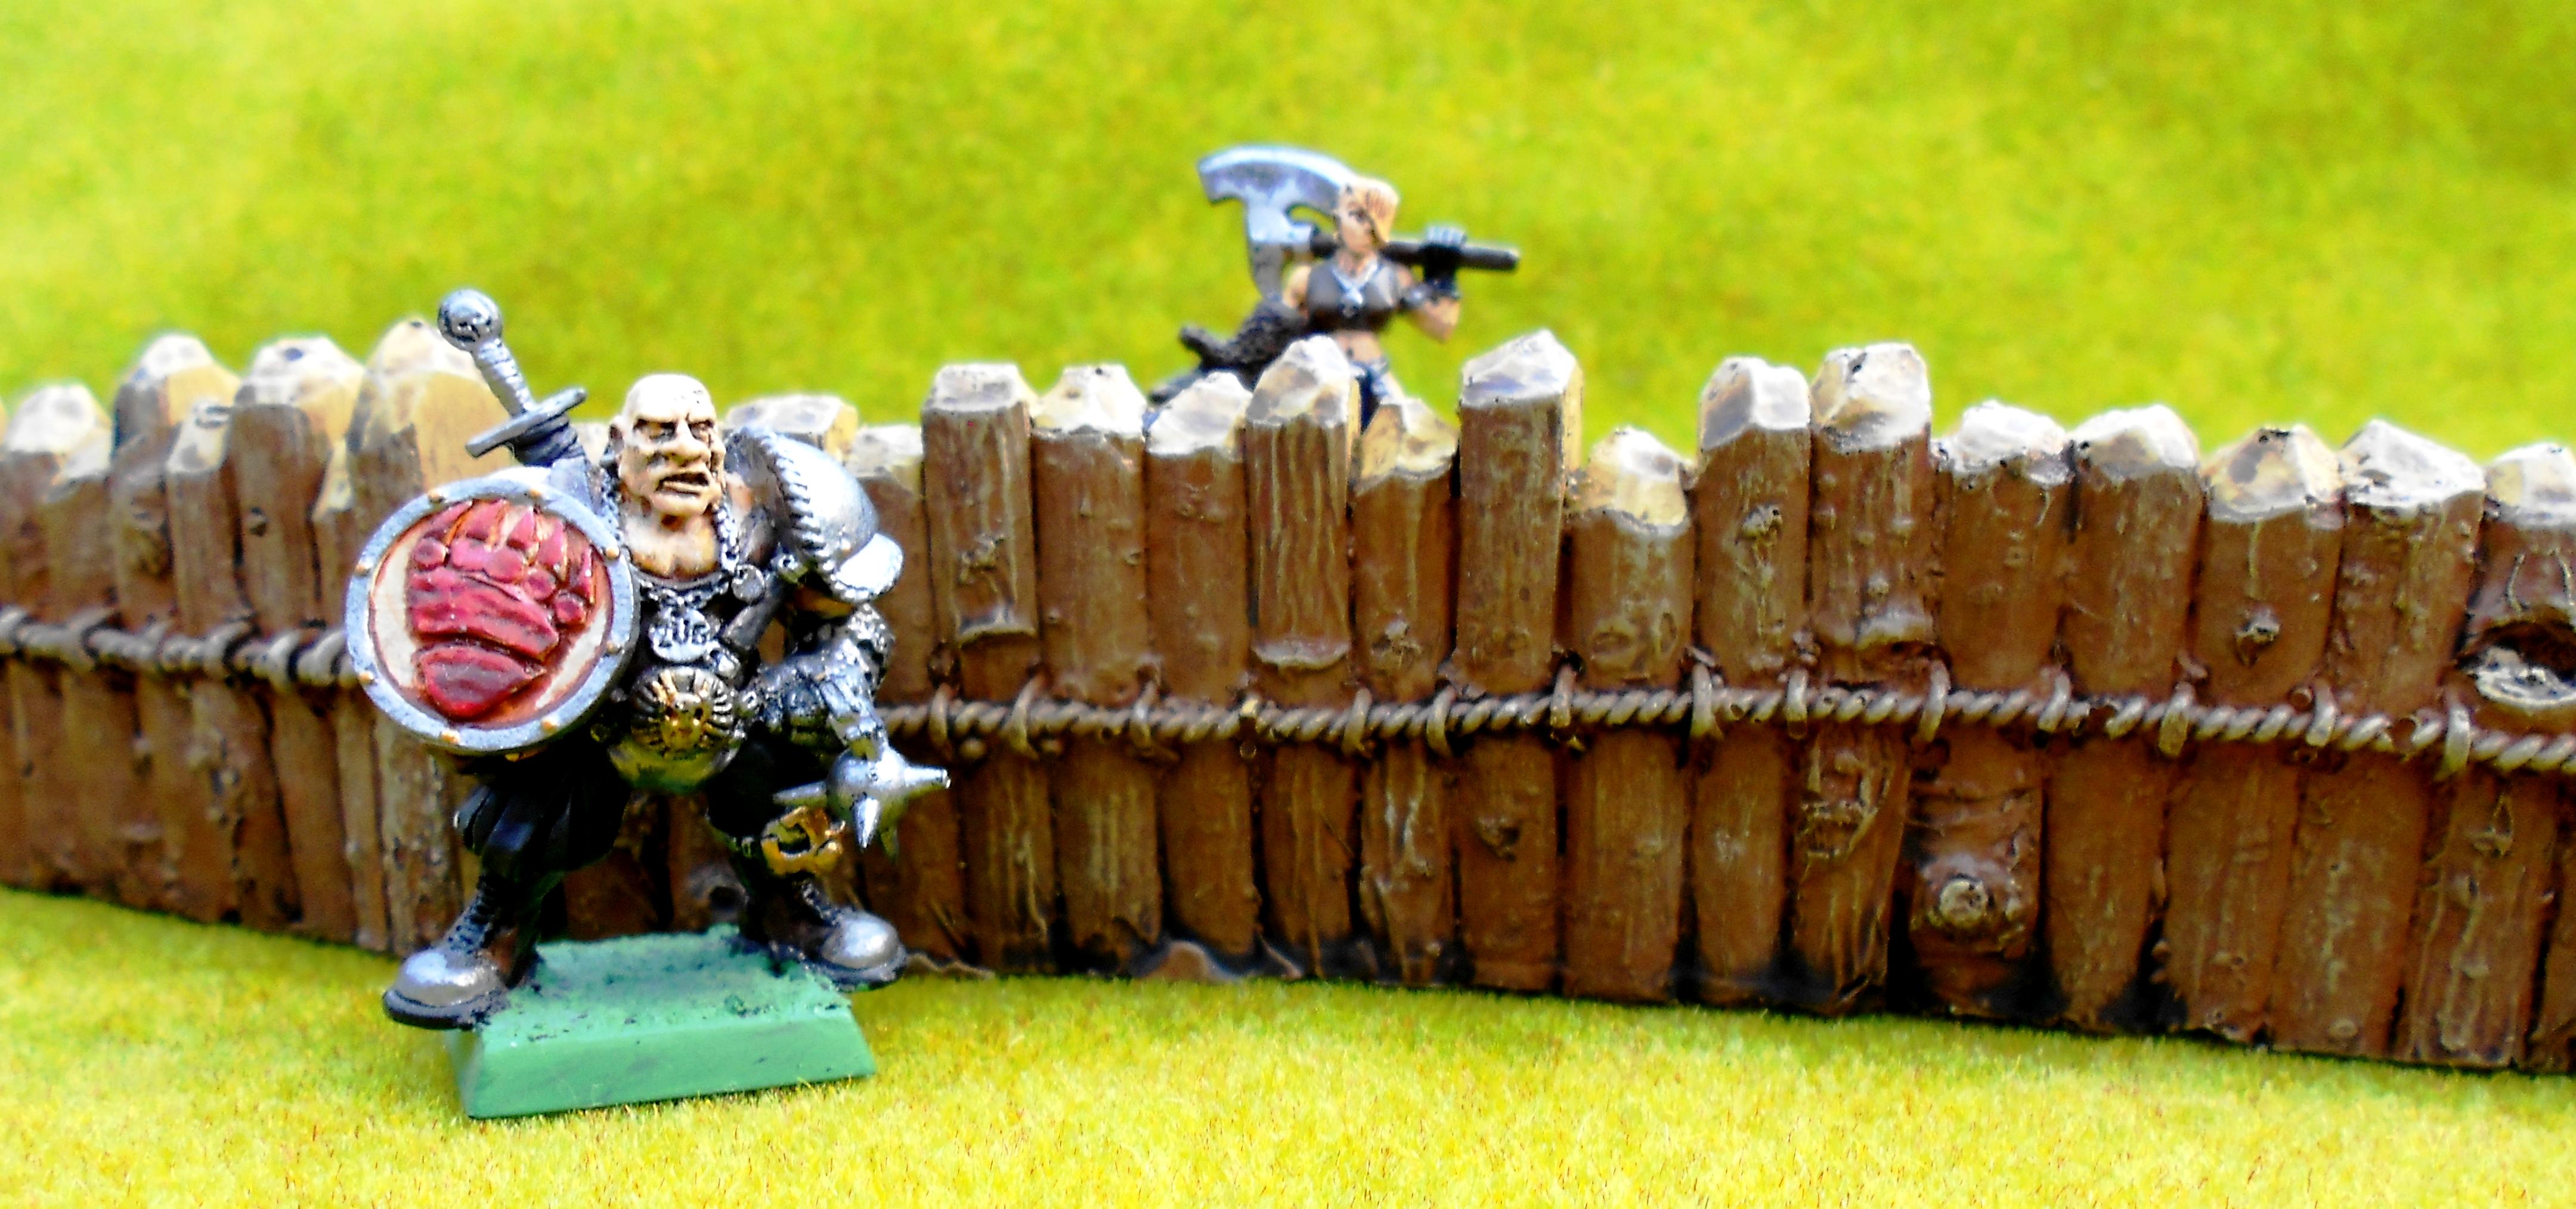 28mm, 35mm, Barricades, Dungeon, Fantasius, Fantasy Scenery, Fortress, Hand Cast, Keep, Mordheim, New, Palisade, Parapets, Rare, Resin, Roleplay, Rpg, Science-fiction, Terrain, Walls, Wargames Bakery, Wargamesbakery, Wargamesbakery.co.uk, Warhammer Fantasy, Wgb